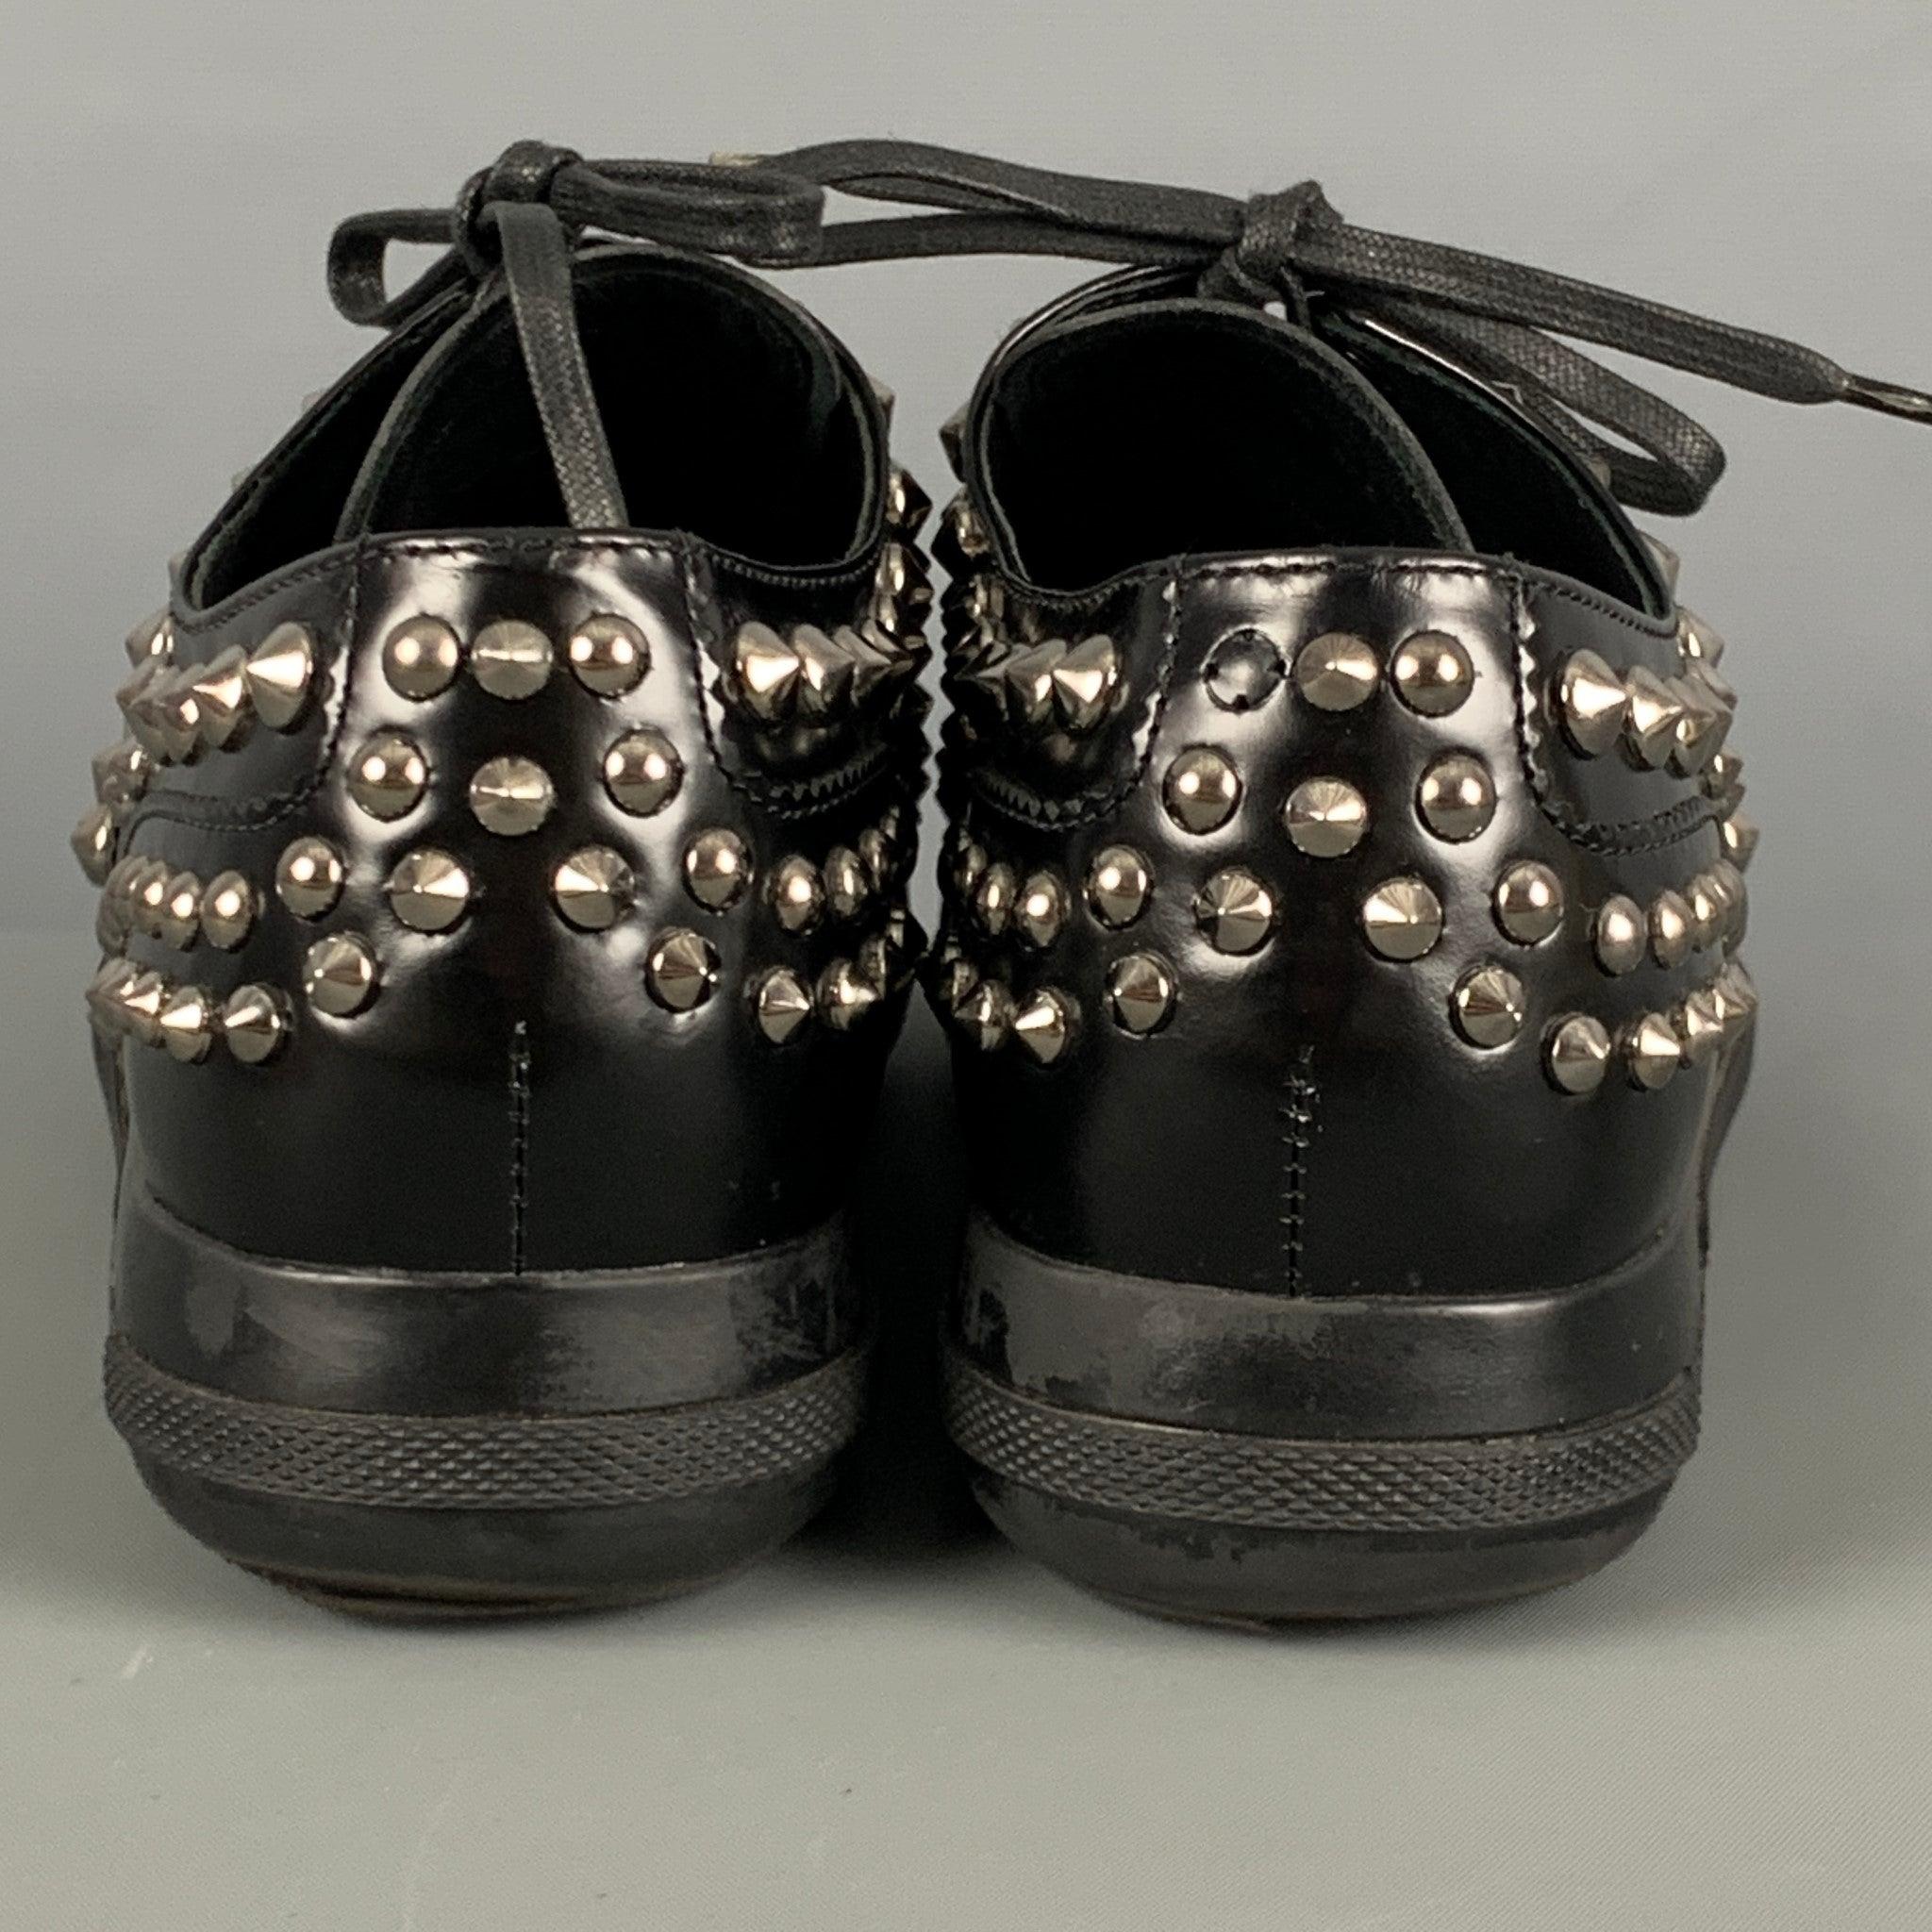 PRADA Size 7.5 Black Leather Studded Lace Up Laces In Good Condition For Sale In San Francisco, CA